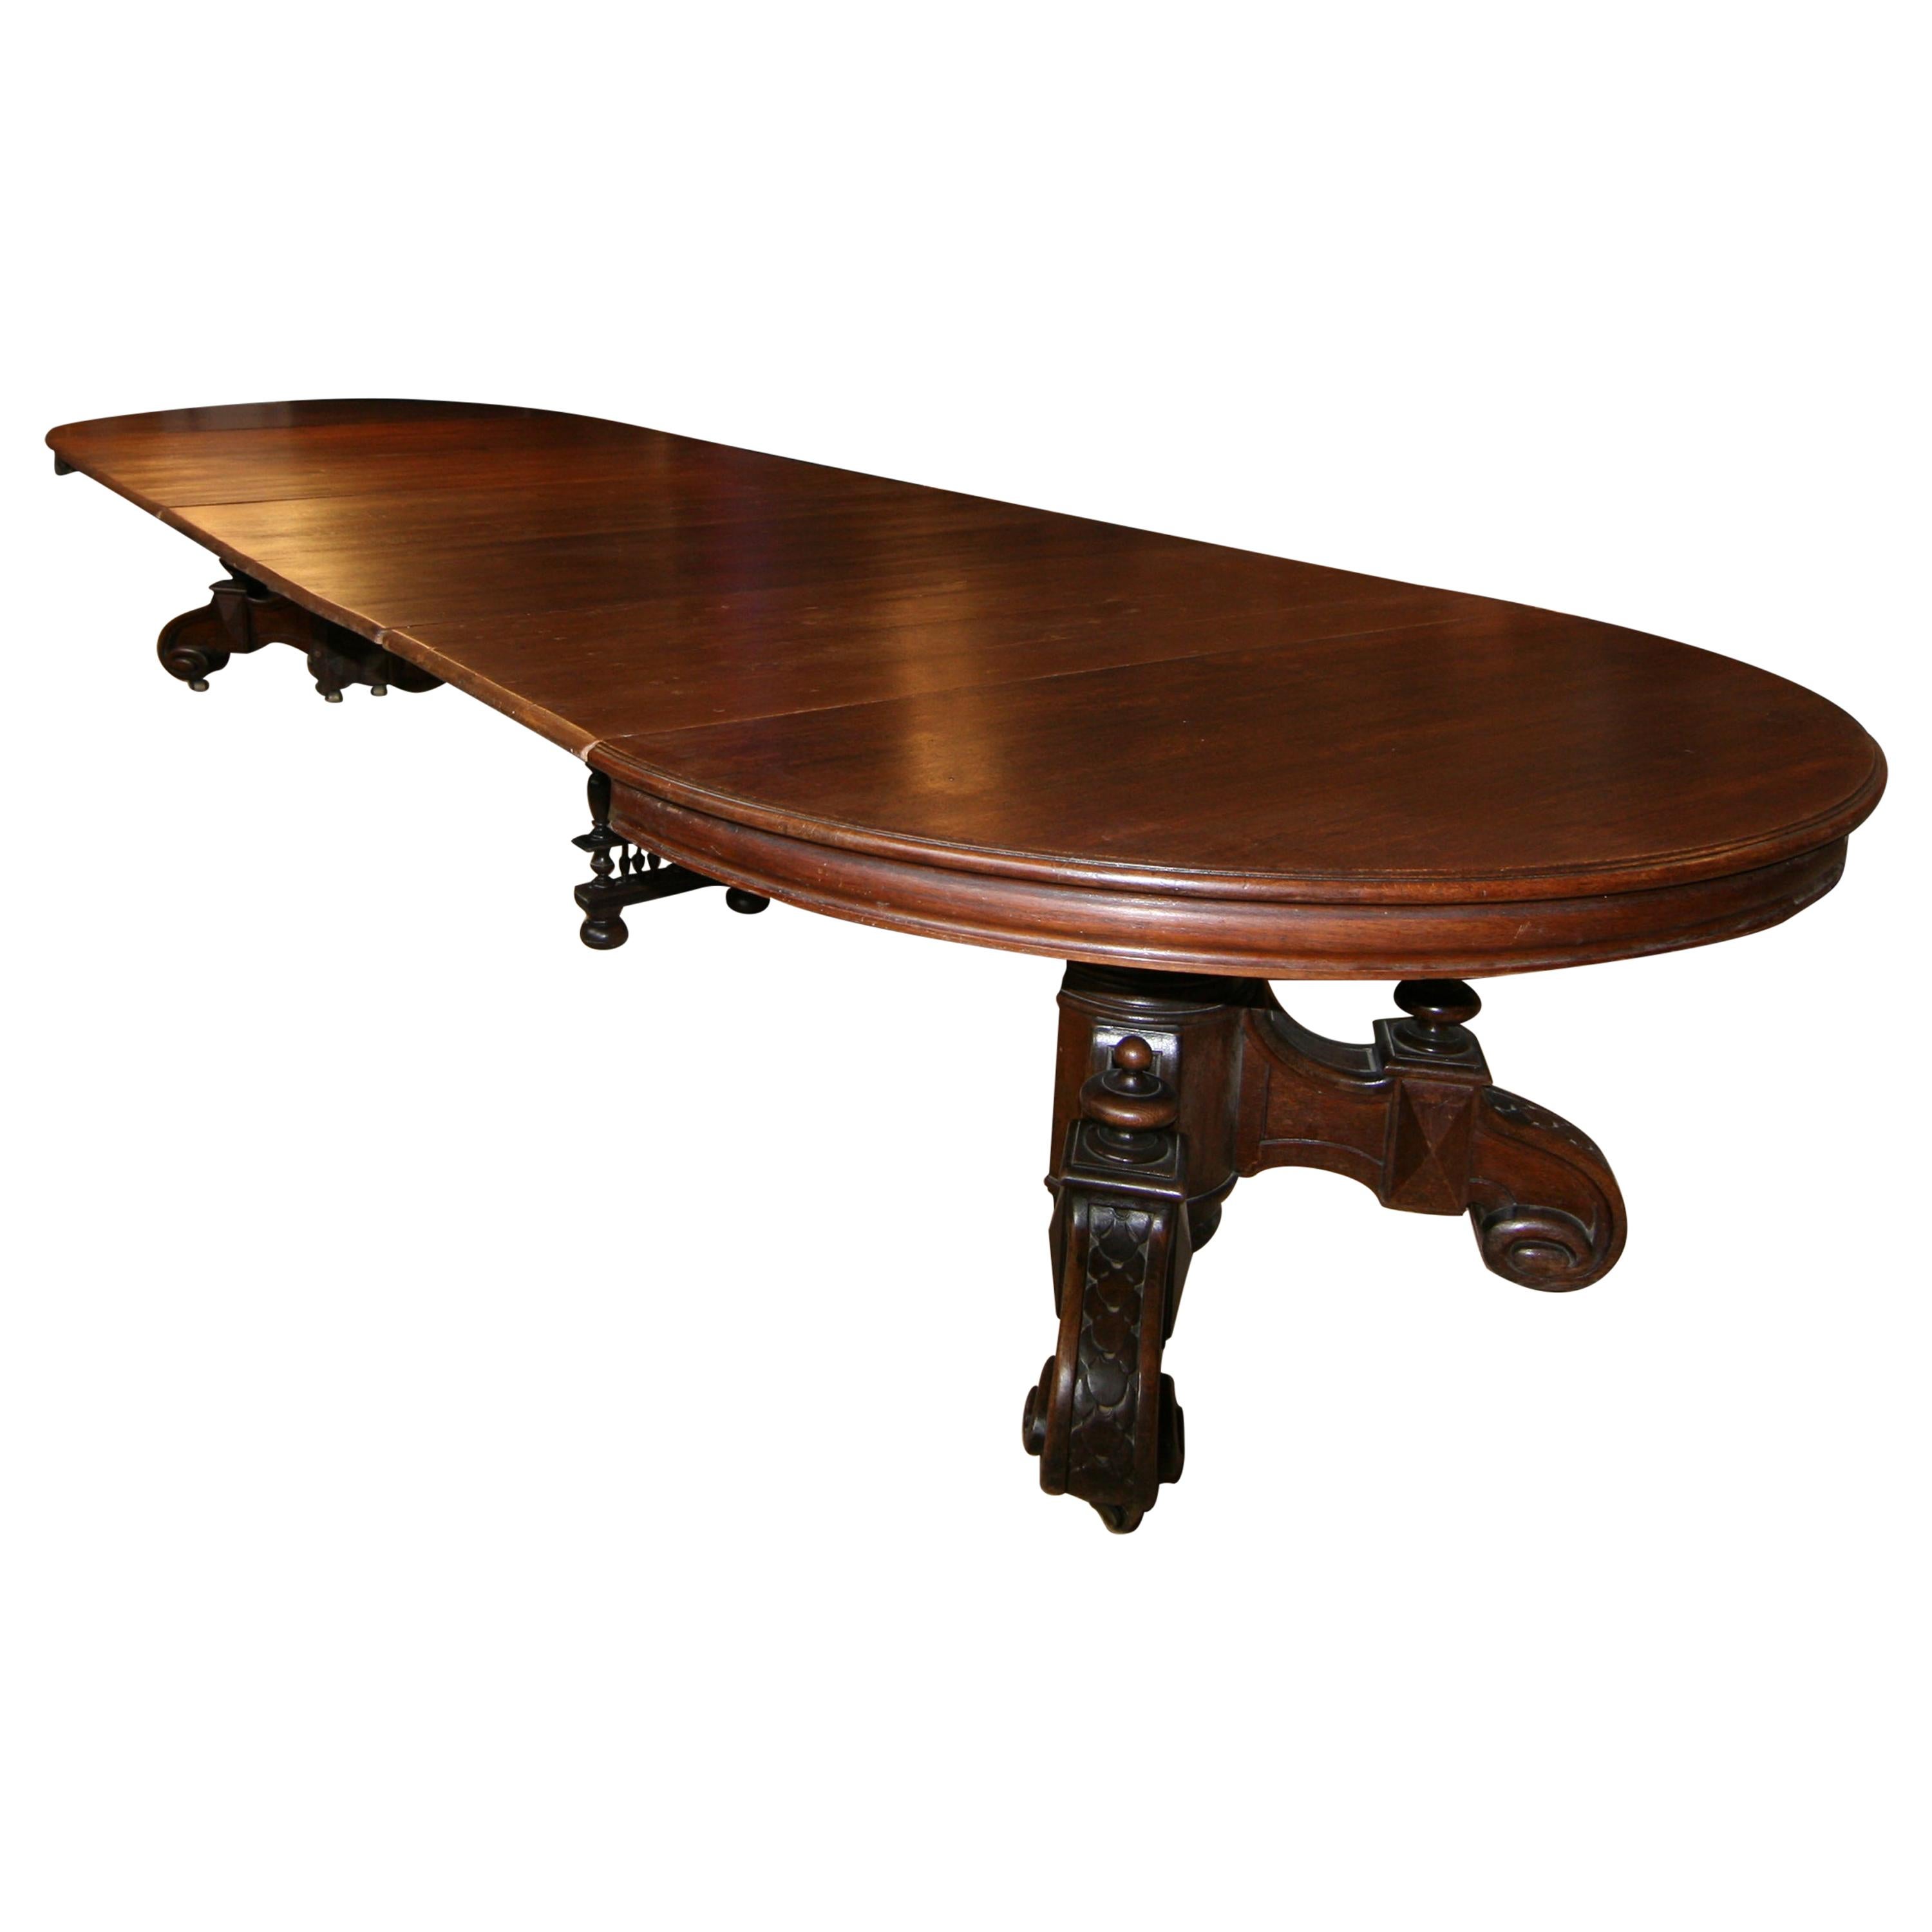 Late 19th Century Oval Extending Dining or Conference Table Made of Oak